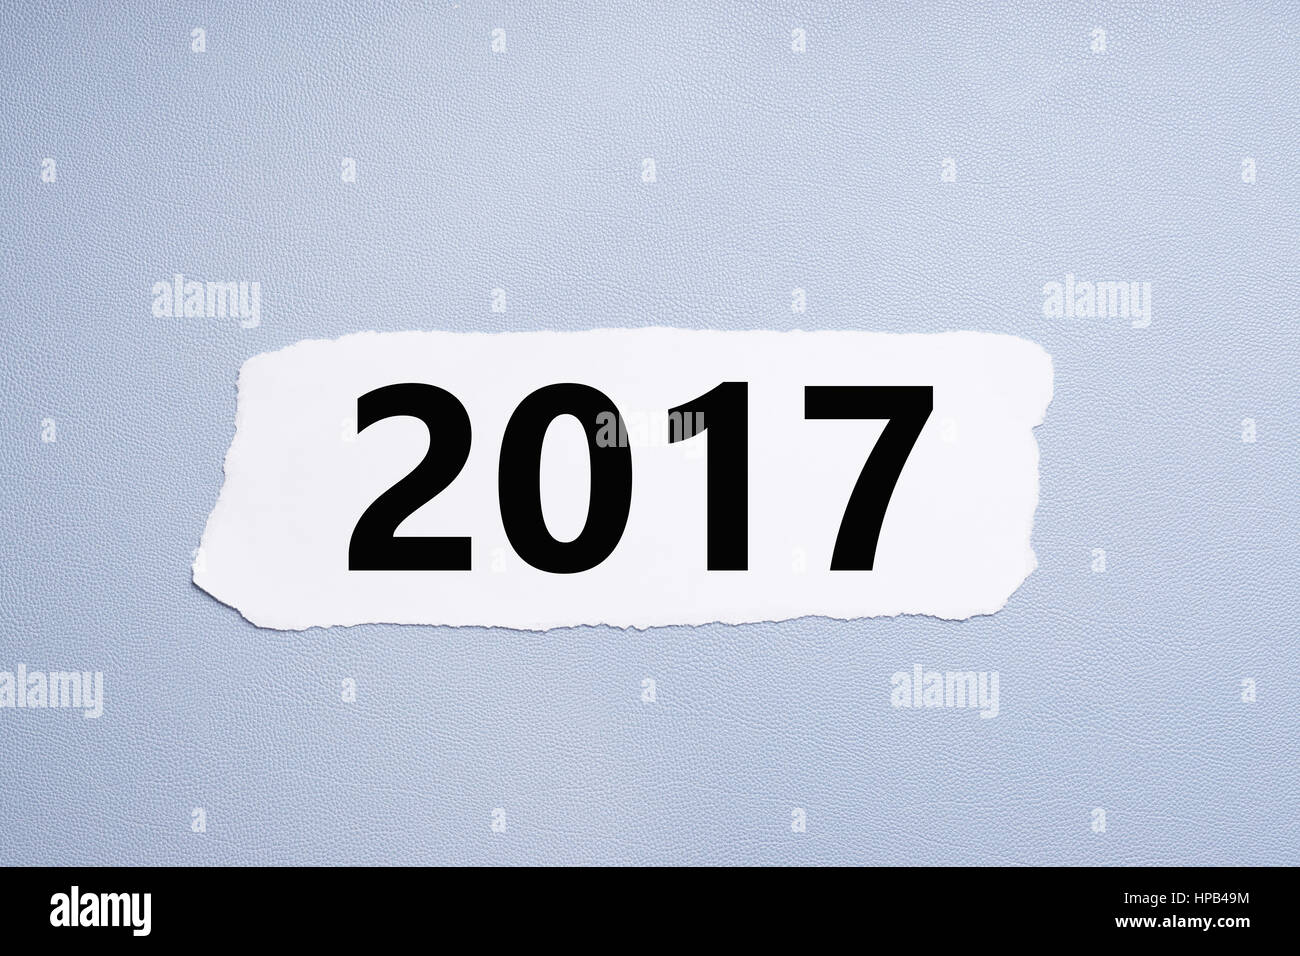 2017 printed on torn piece of paper Stock Photo